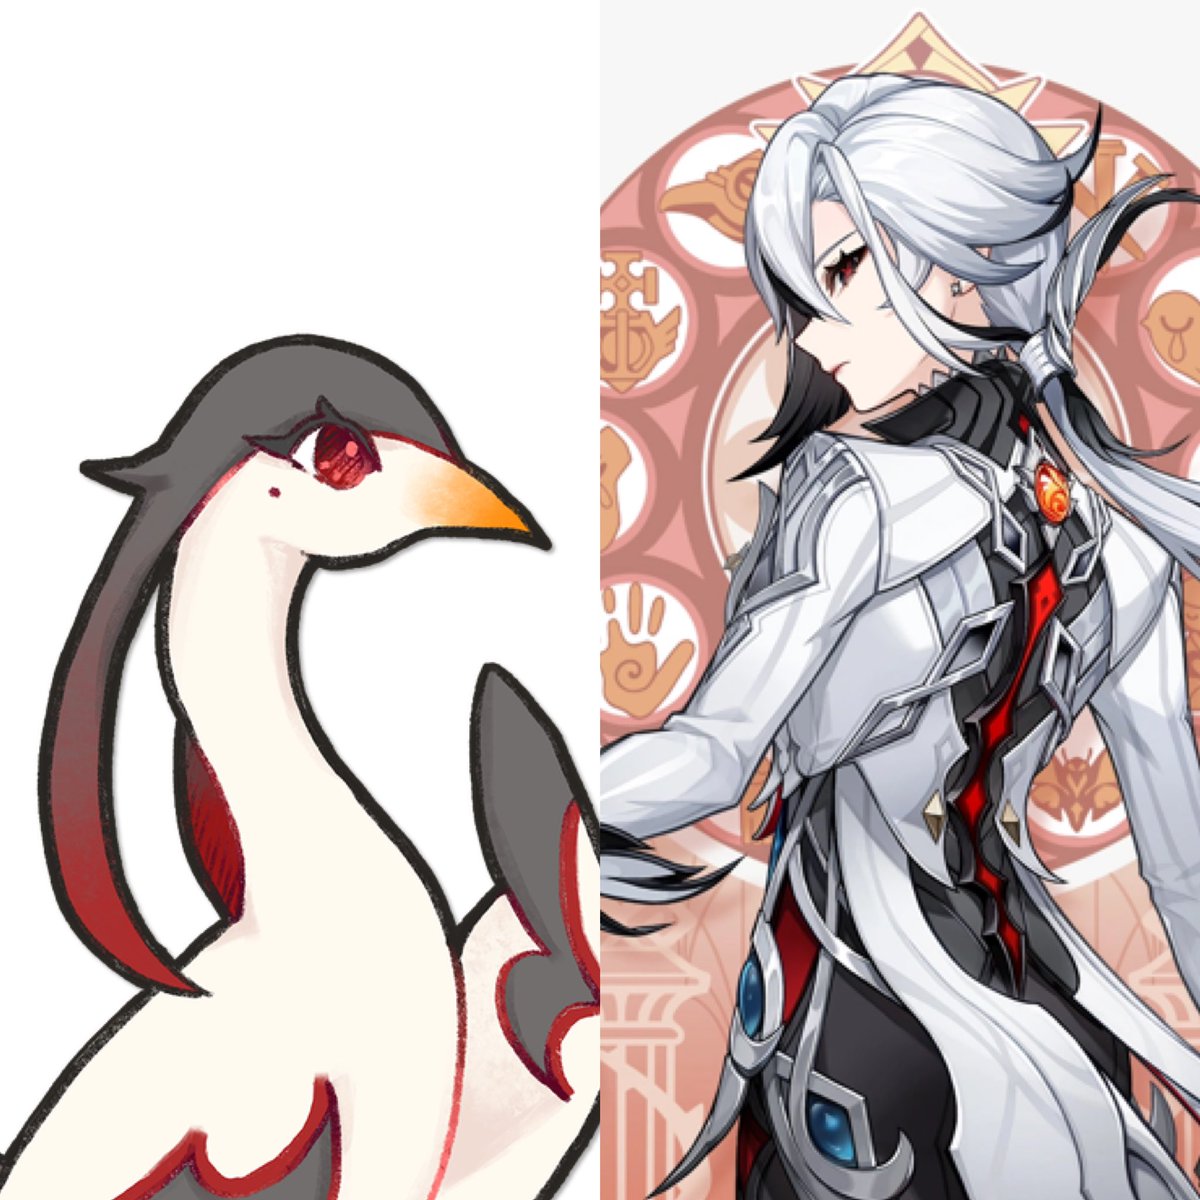 They’re literally the same character…